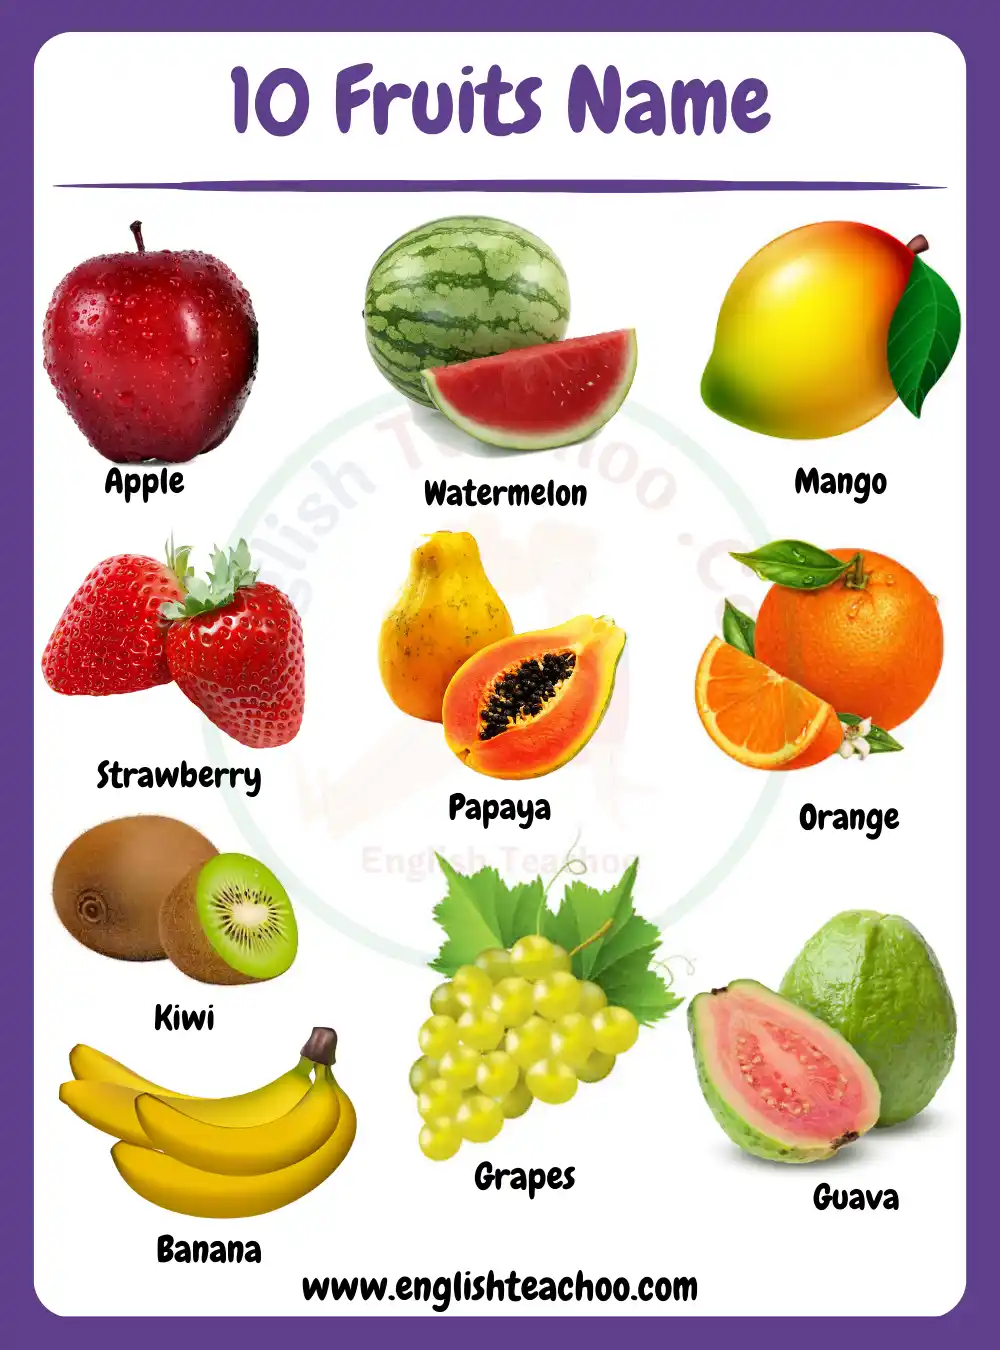 10 Fruits Name In English With Pictures - EnglishTeachoo